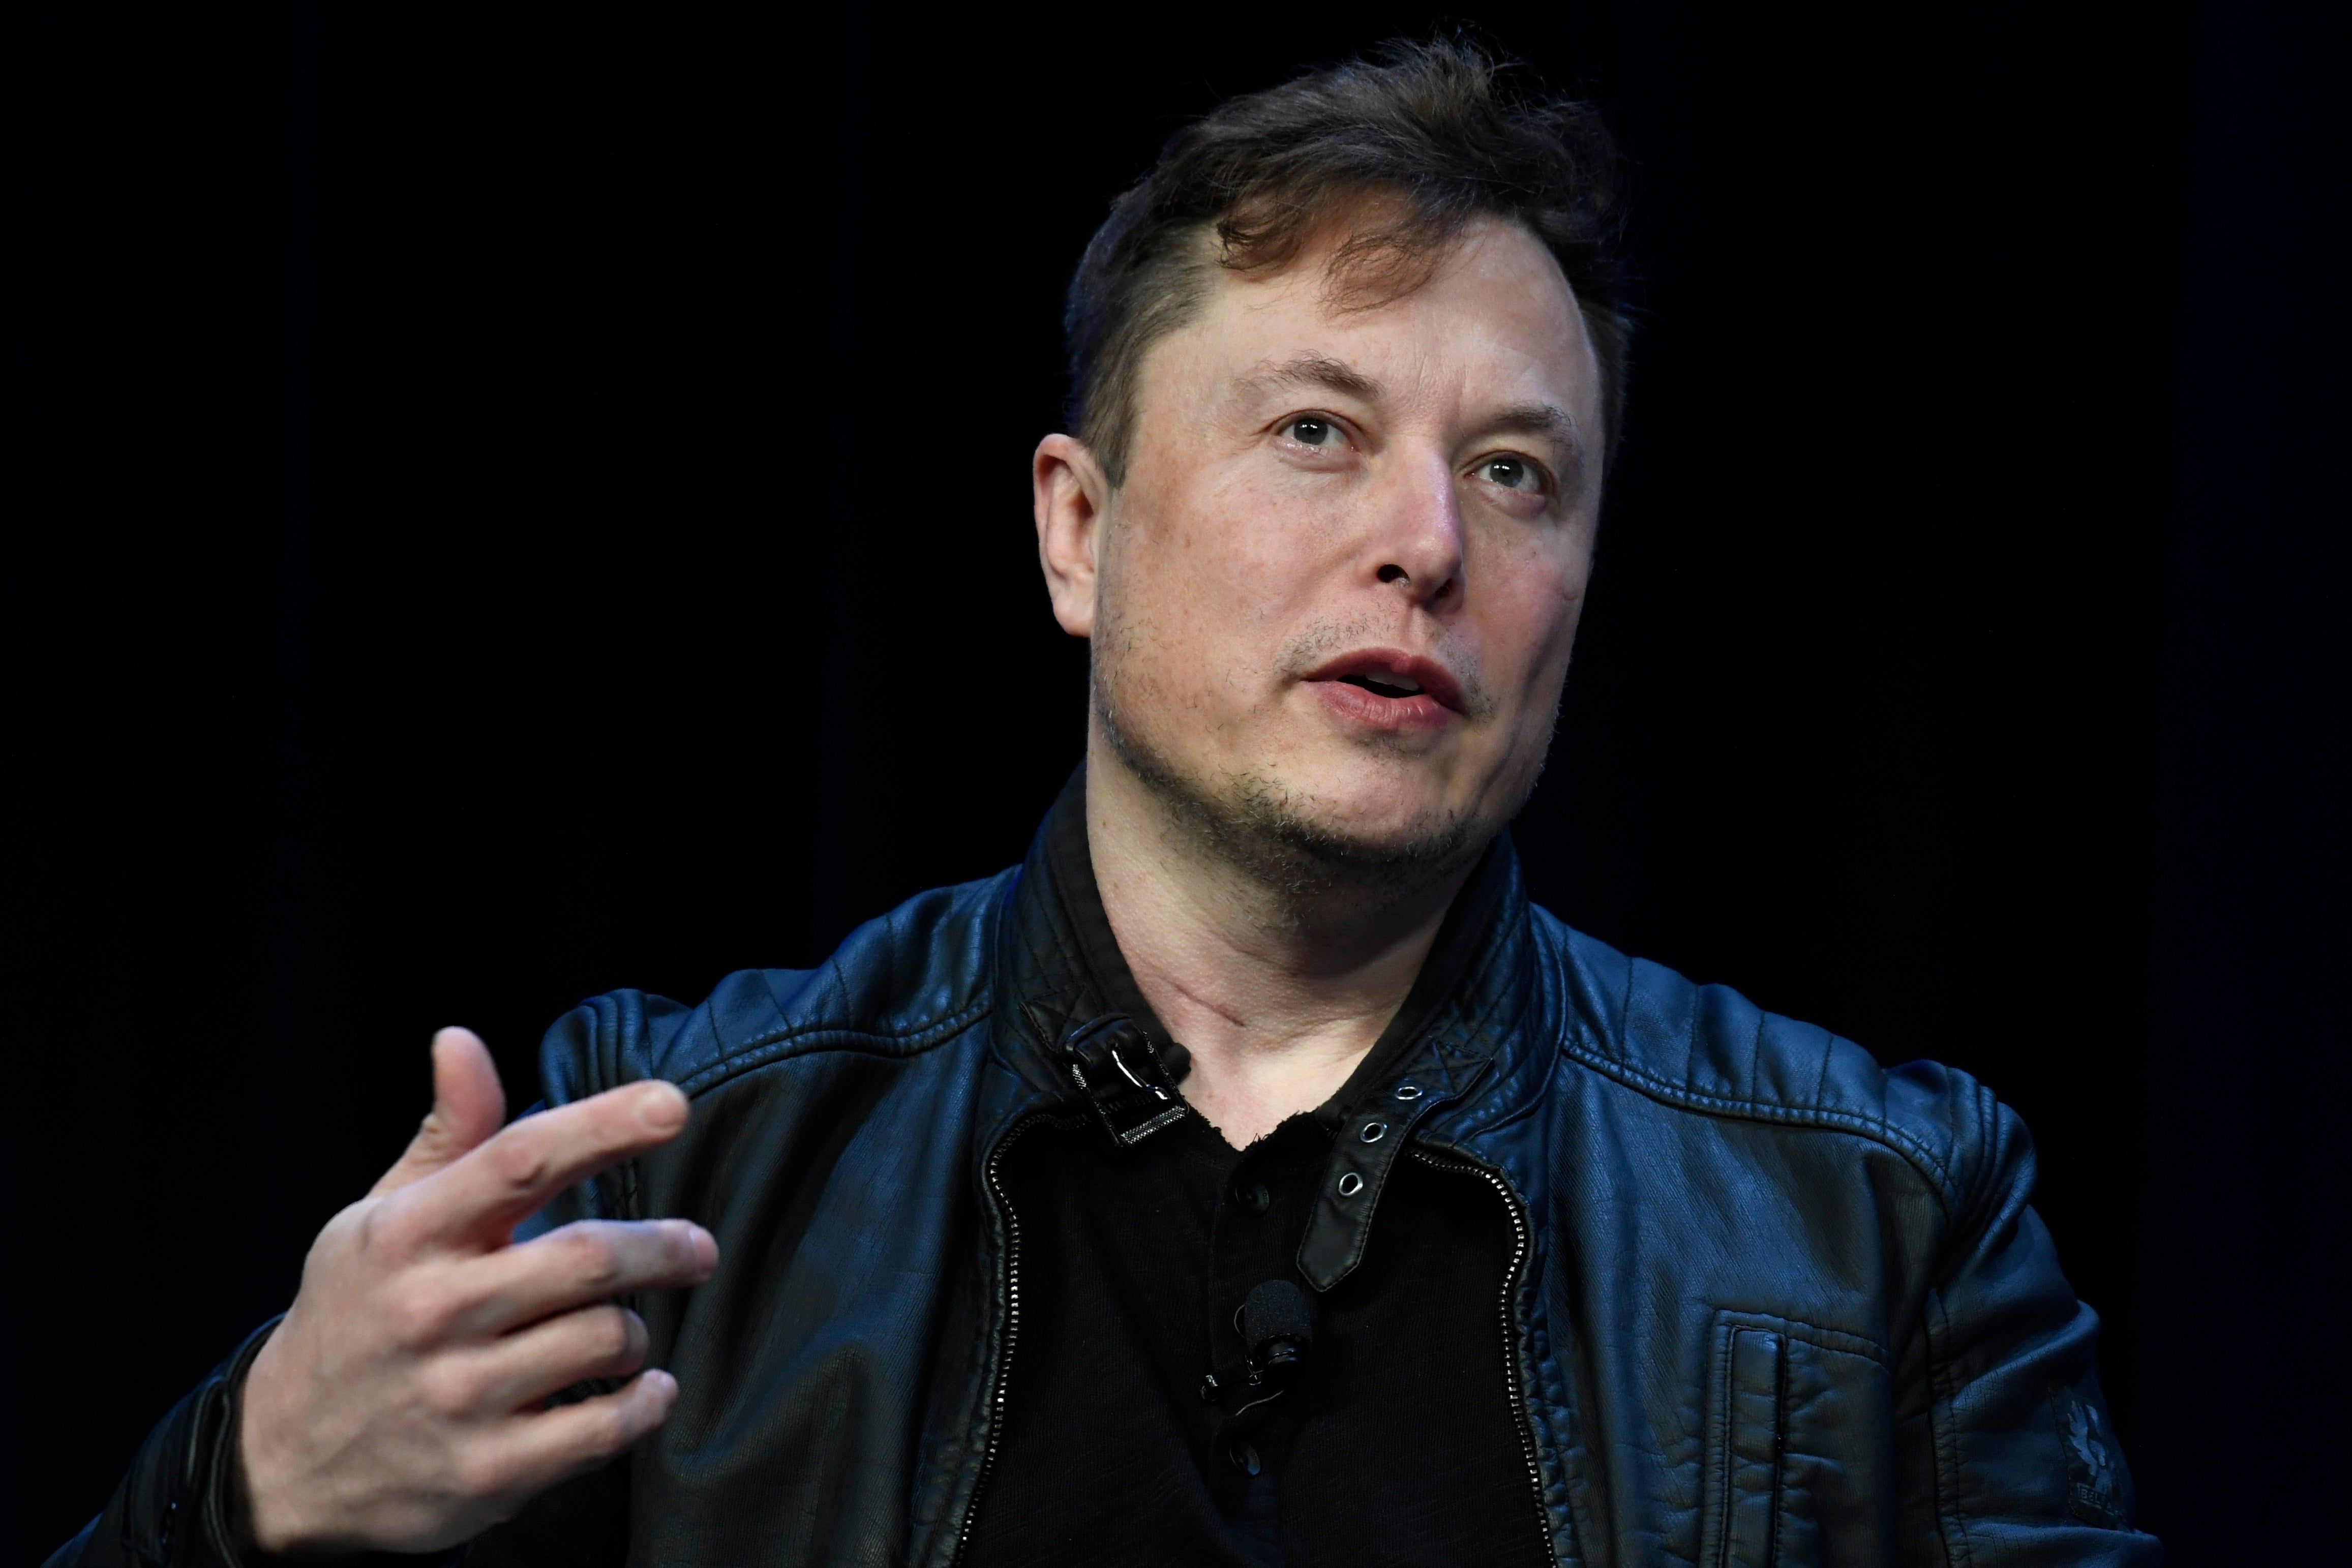 Elon Musk has been a frequent critic of efforts to reform criminal justice in San Francisco